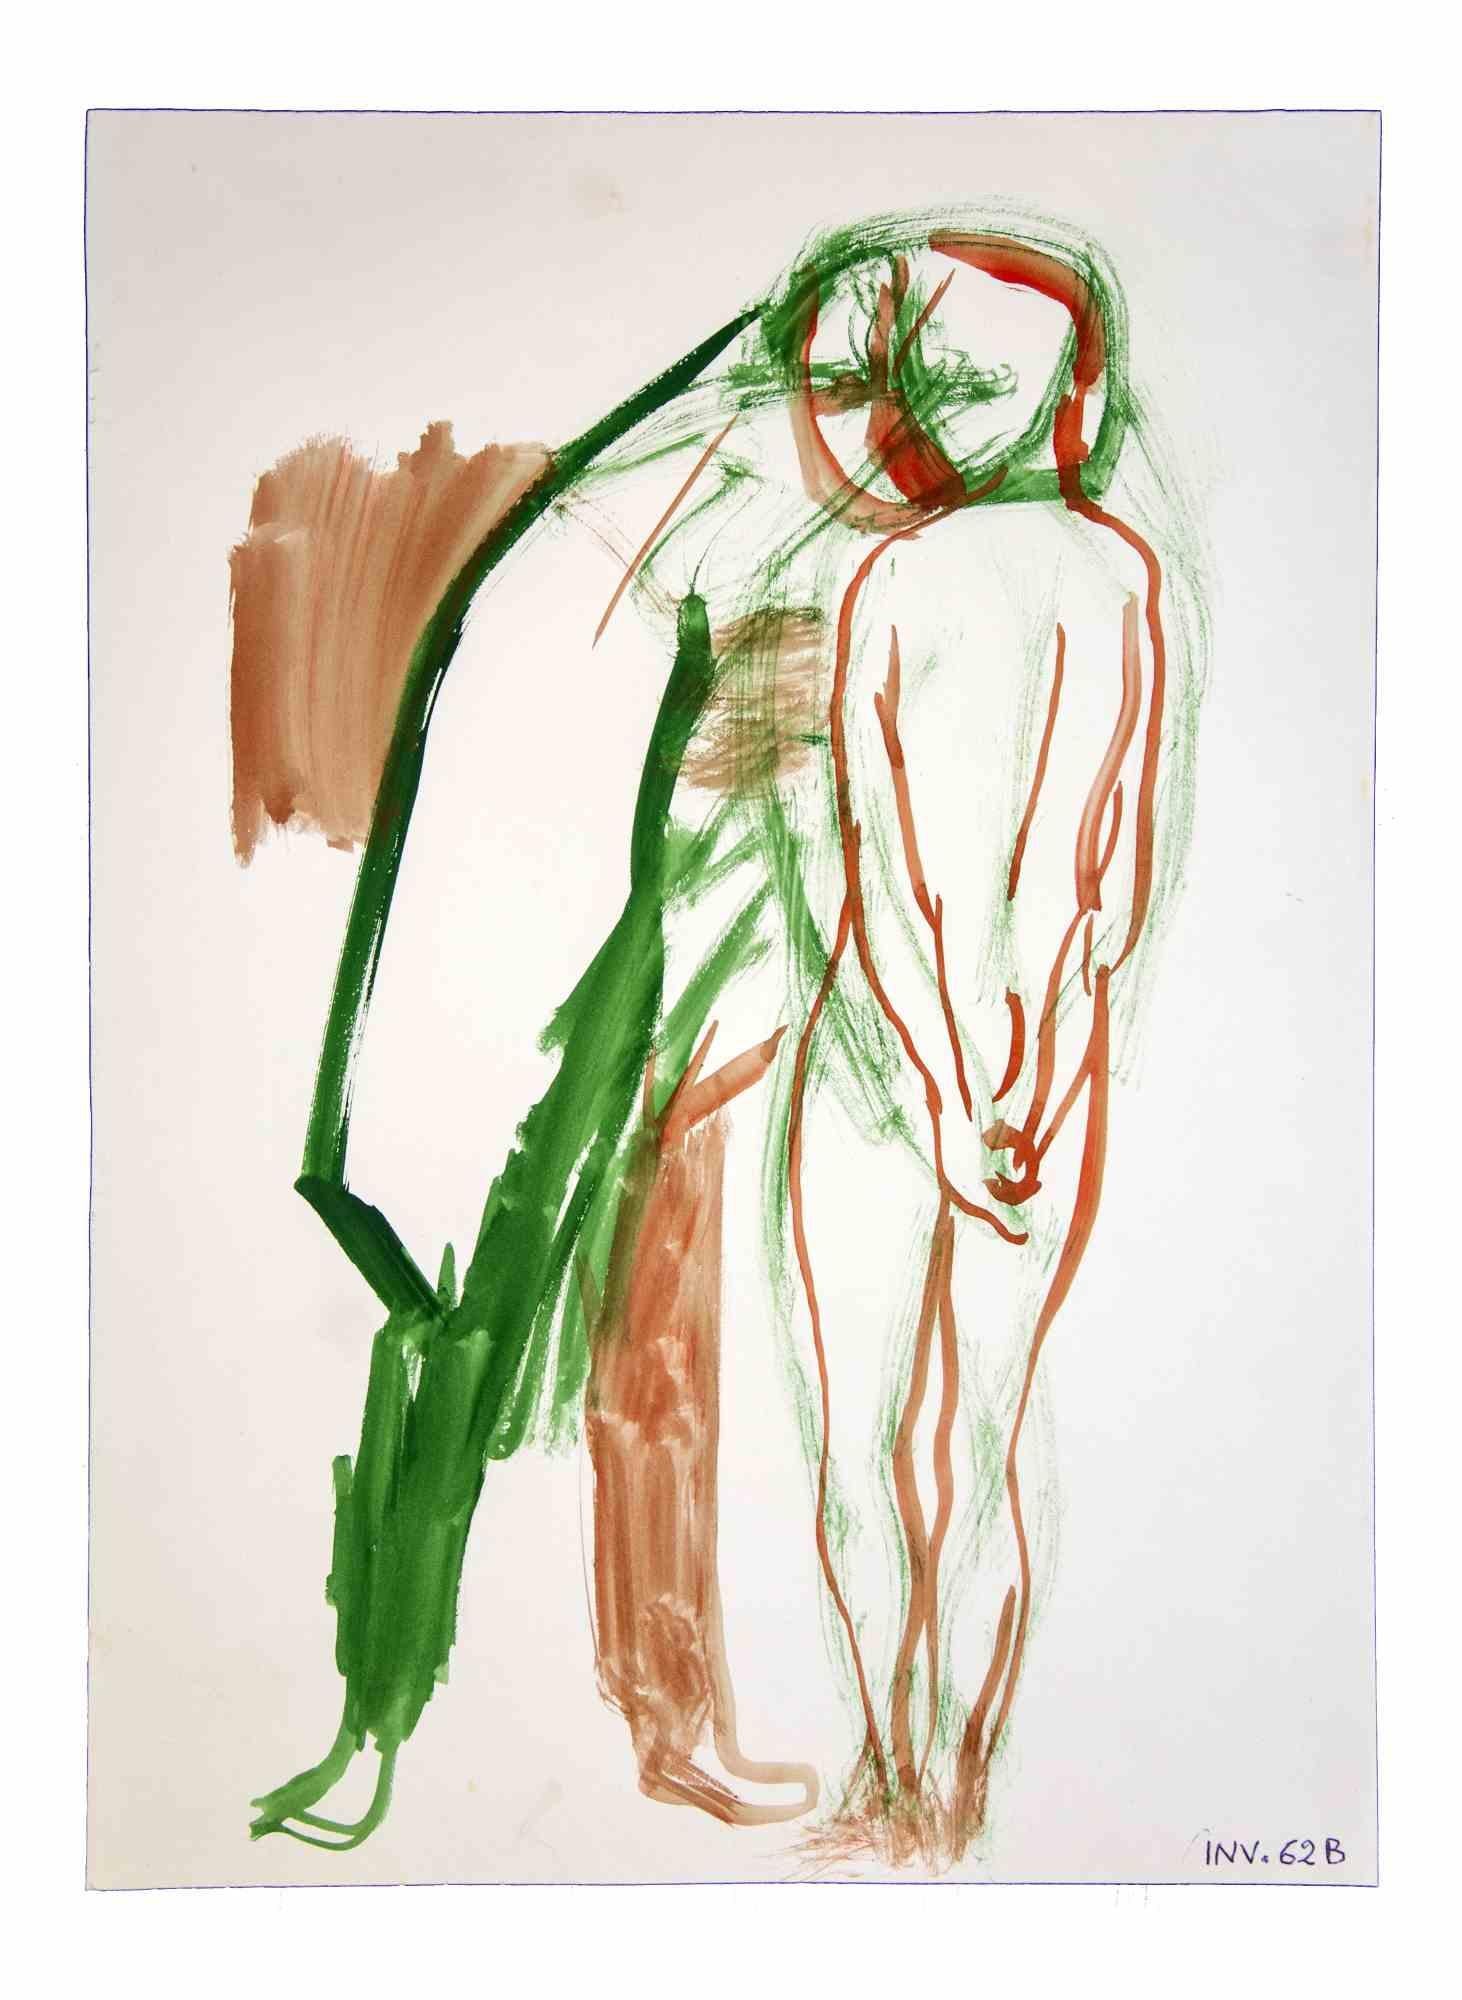 The Visit is an original drawing in watercolor on paper realized by Leo Guida in the 1970s.

Good condition.

Leo Guida (1992 - 2017). Sensitive to current issues, artistic movements and historical techniques, Leo Guida has been able to weave with